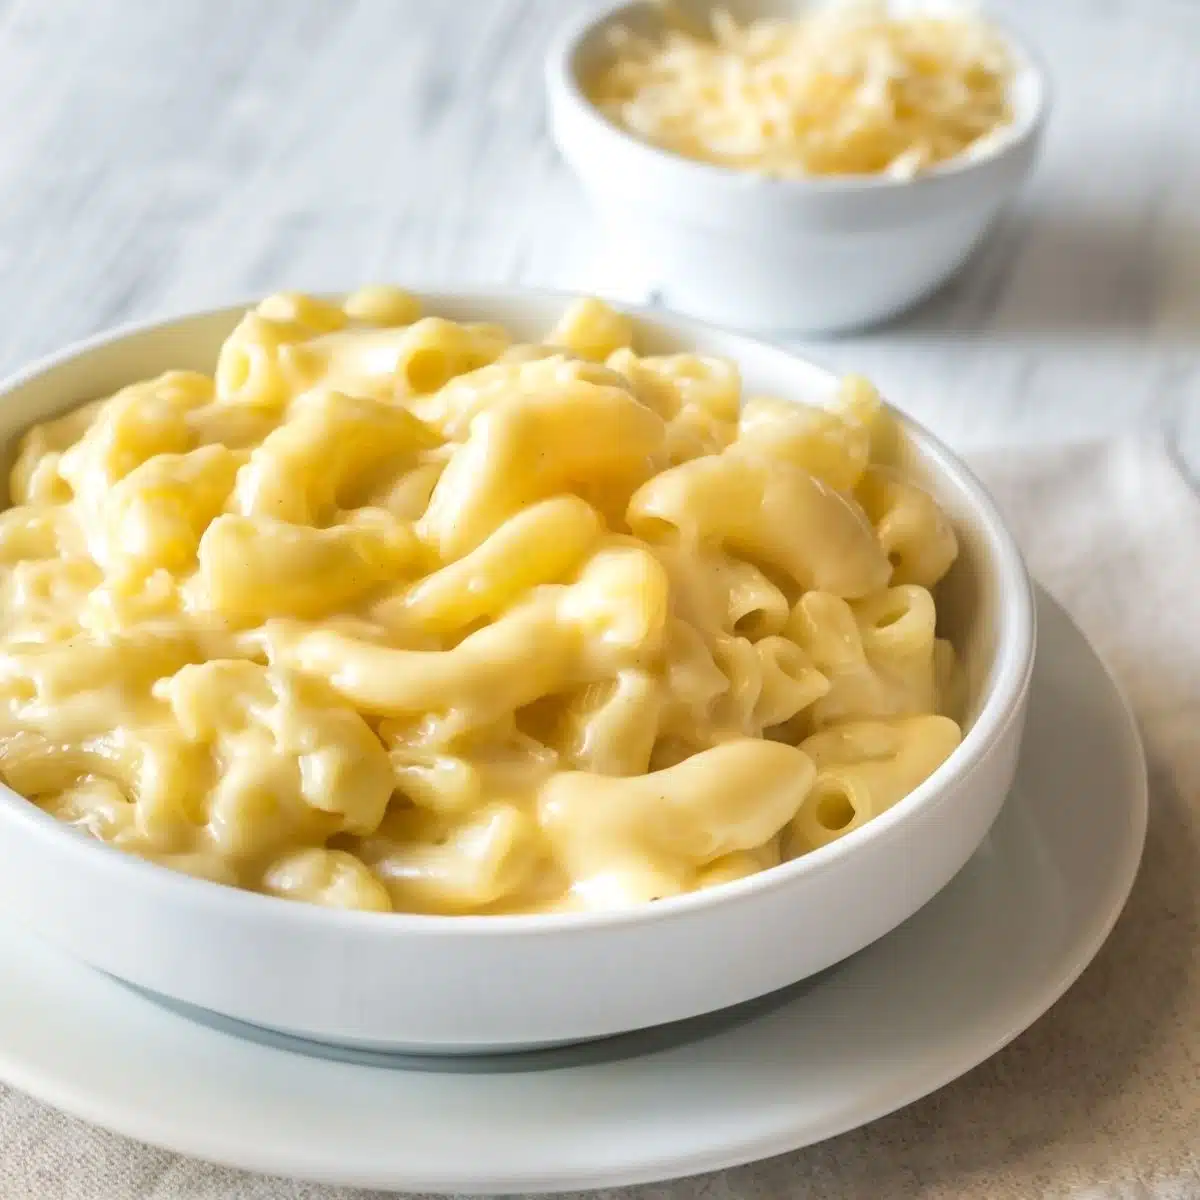 Mac and cheese without flour recipe makes creamy, delicious pasta like this hearty serving shown in a white bowl.